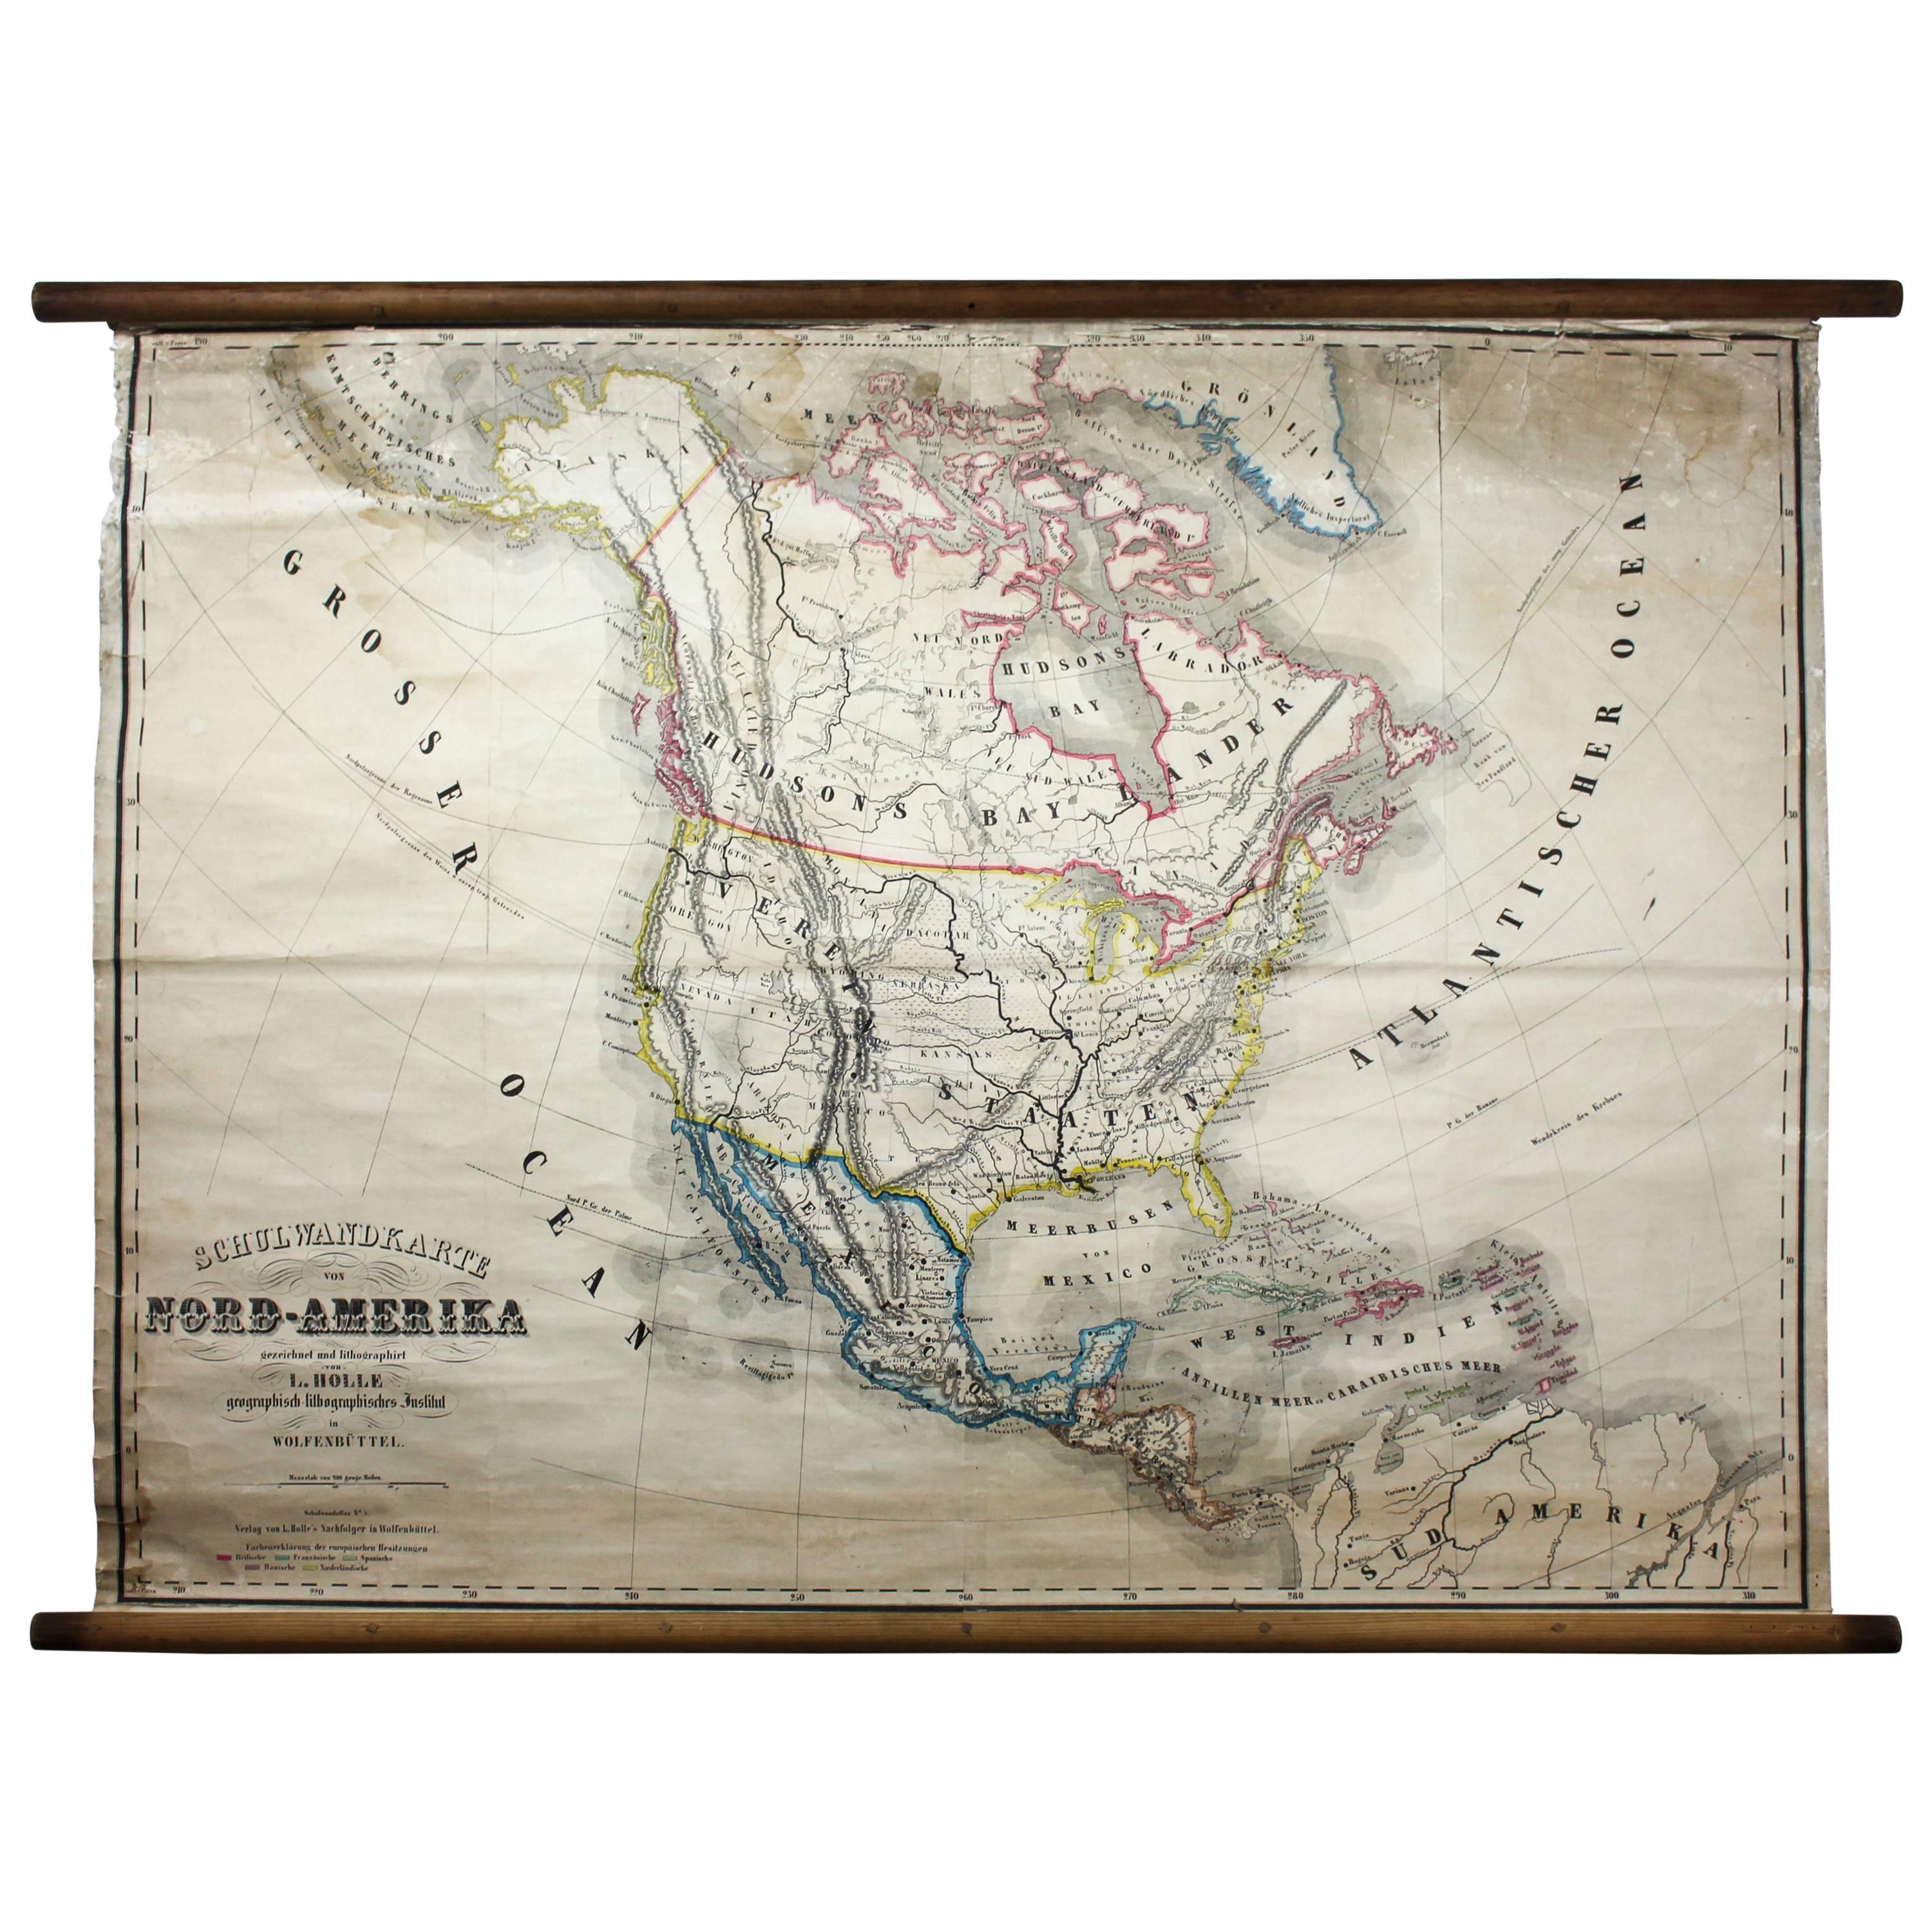 Antique Mid-19th Century Wall Map of North America by Lienhart Holle